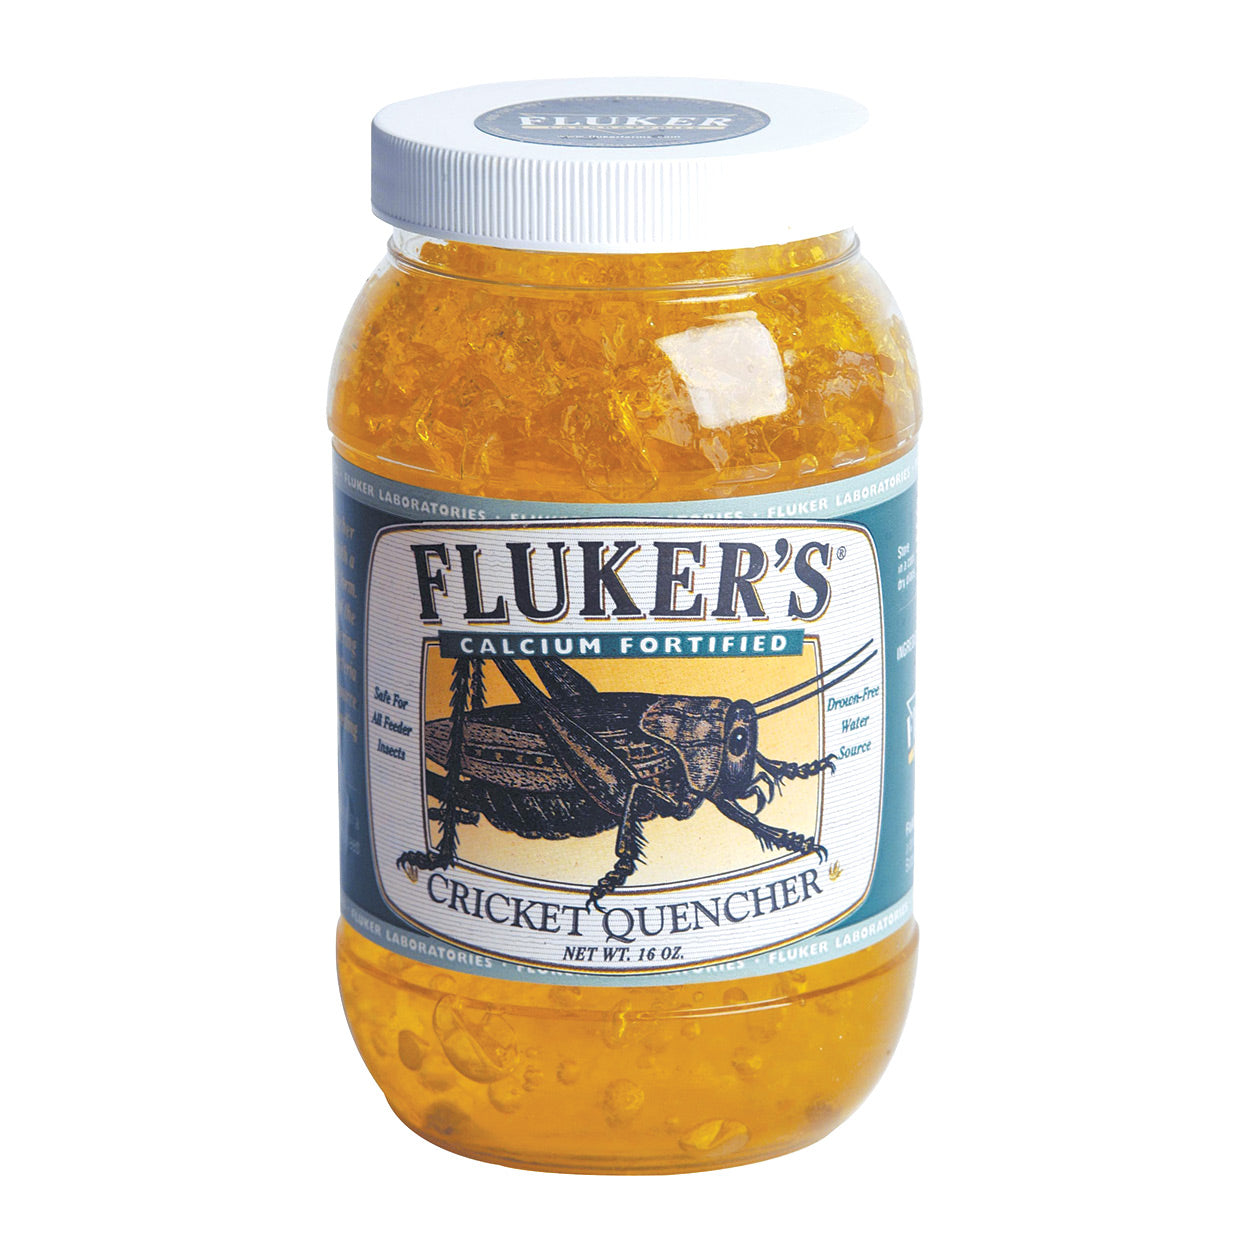 Fluker's Cricket Quencher with Calcium